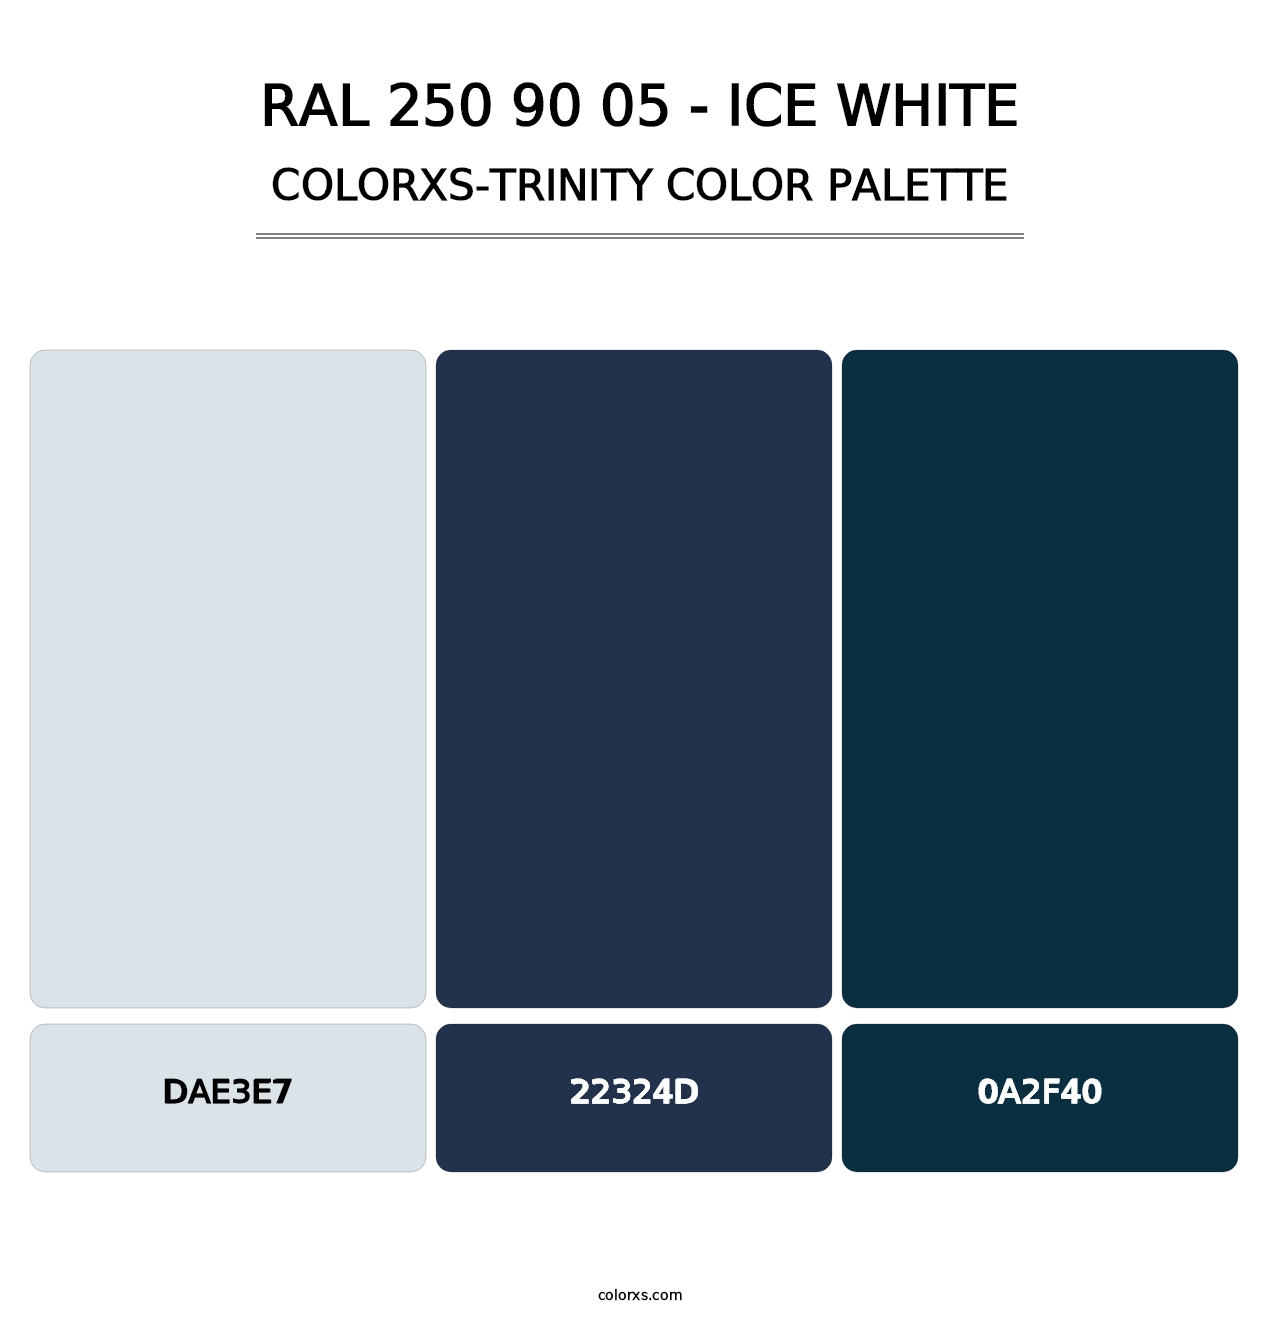 RAL 250 90 05 - Ice White - Colorxs Trinity Palette